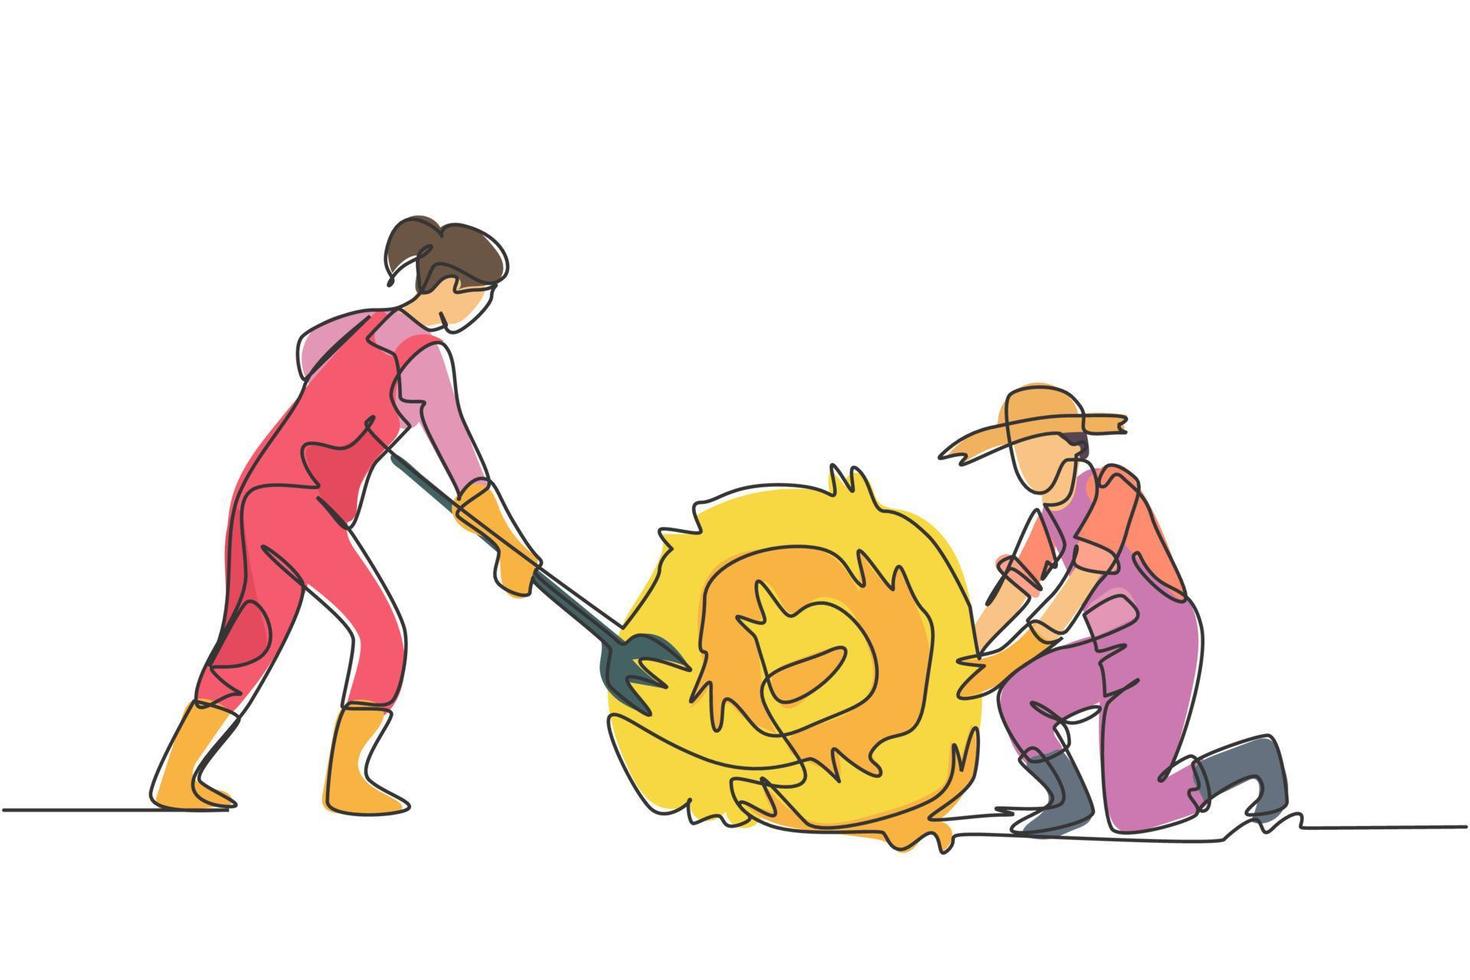 Single one line drawing female farmer was stabbing a haystack and rolling it with straw stick and the male farmer was helping her. Minimalism concept. One line draw design graphic vector illustration.